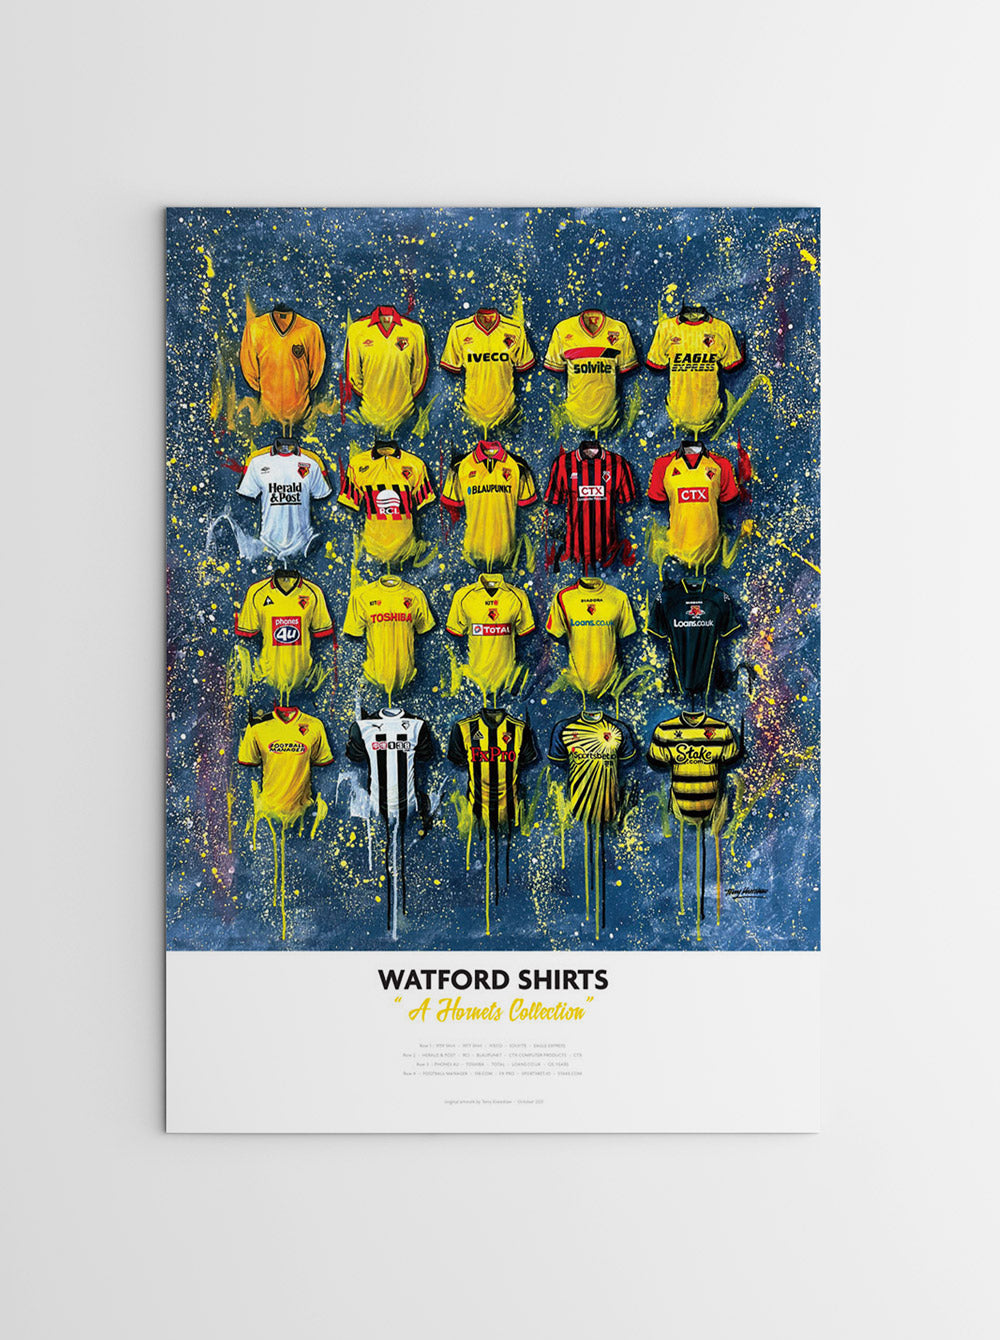 This personalised A2 limited edition print artwork by Terry Kneeshaw features 20 iconic Watford team shirts, showcasing the rich history of the club. The vibrant colours and intricate detailing in each shirt are captured beautifully in this print. Whether you are a long-time supporter or a new fan, this artwork is sure to impress and make a great addition to any collection. The perfect way to celebrate the club's achievements over the years.